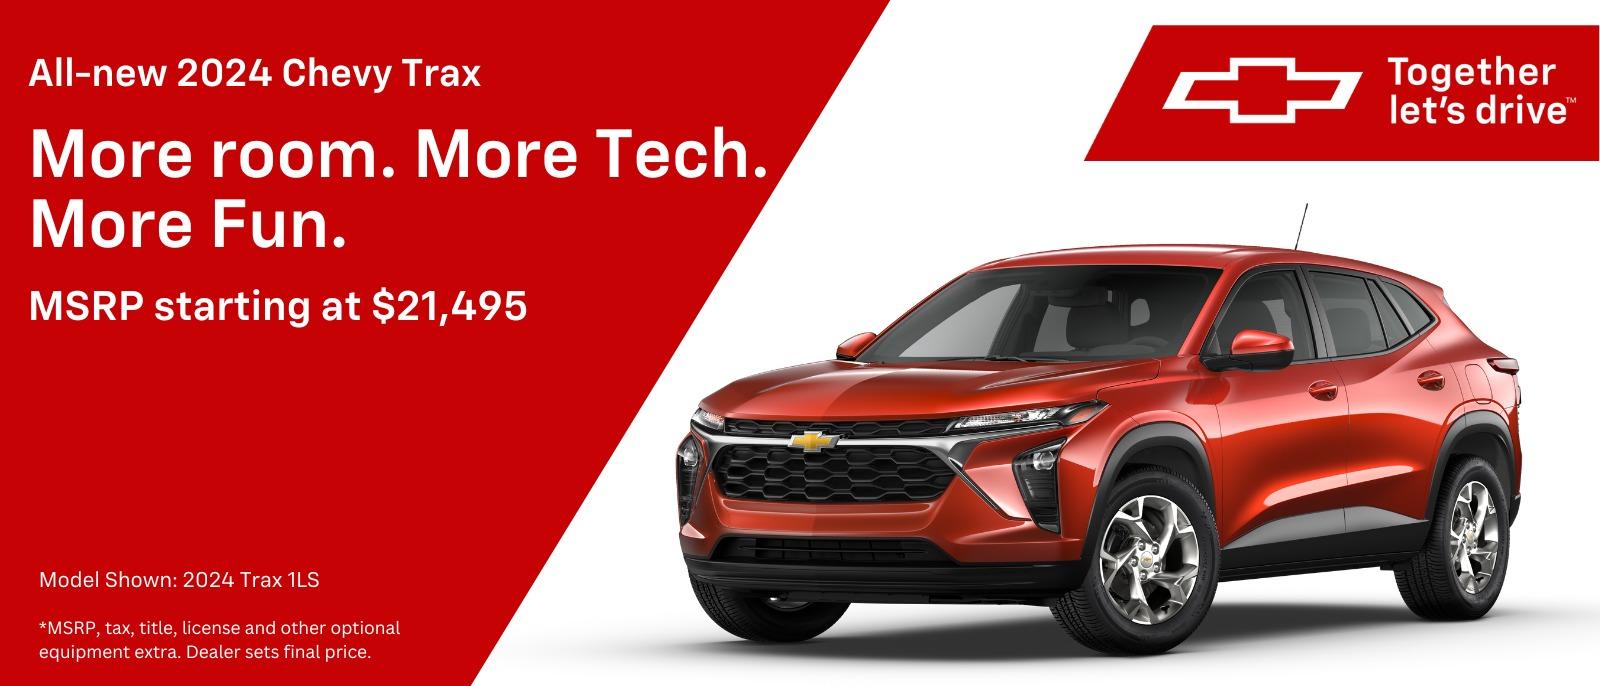 Bryner Chevrolet - #1 New and Used Cars Retailer  Serving Philadelphia  from nearby JENKINTOWN, PA